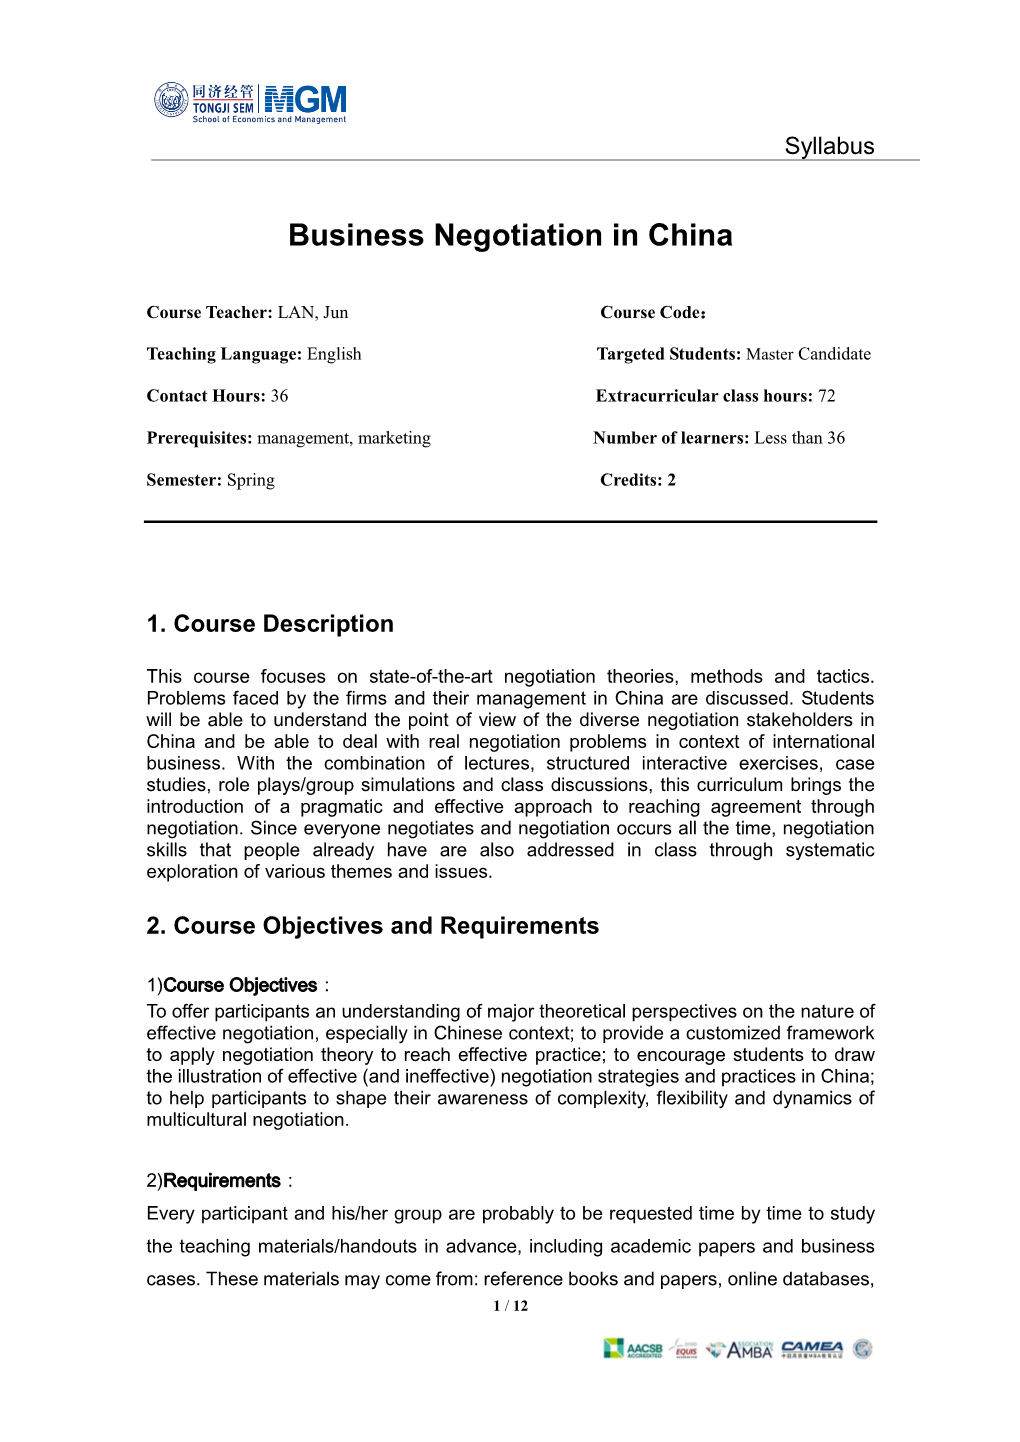 Business Negotiation in China